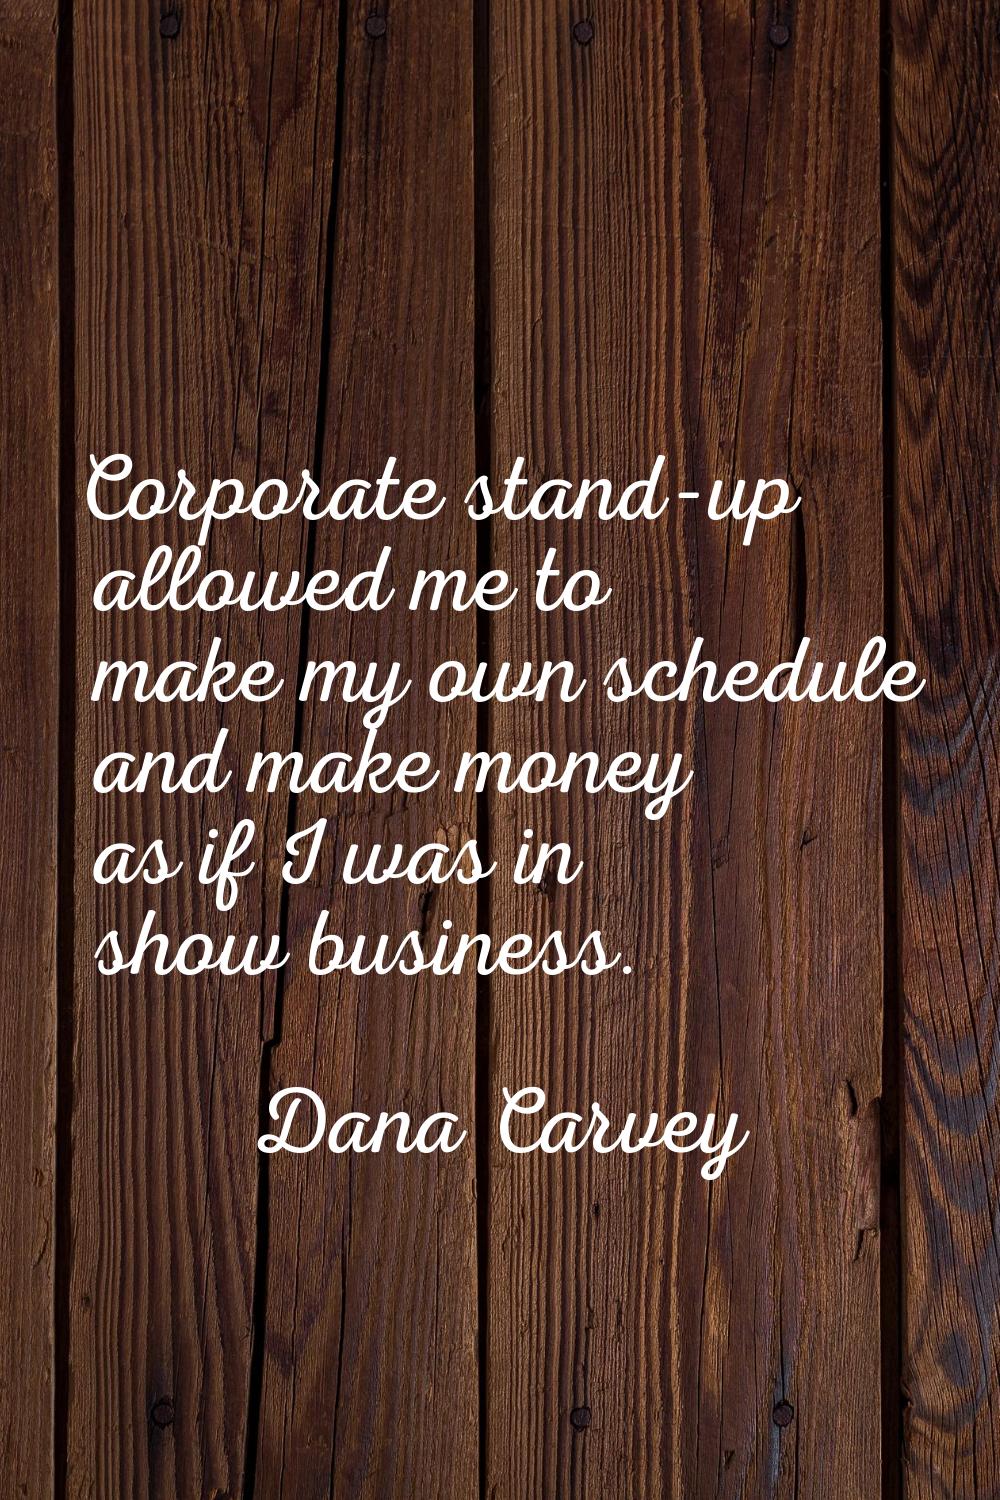 Corporate stand-up allowed me to make my own schedule and make money as if I was in show business.